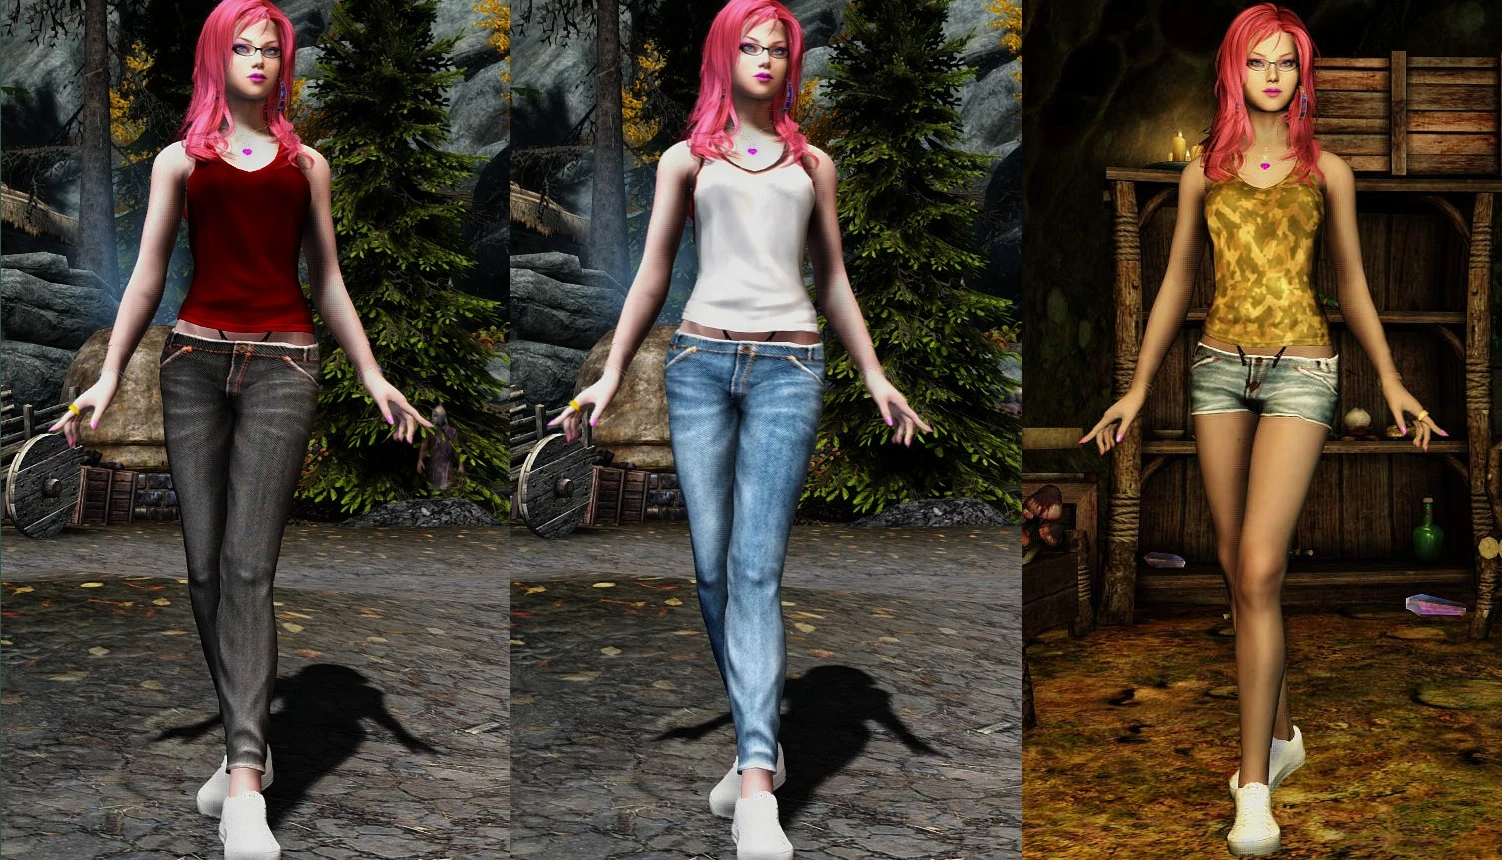 Gallery of Skyrim Casual Clothes Mod.